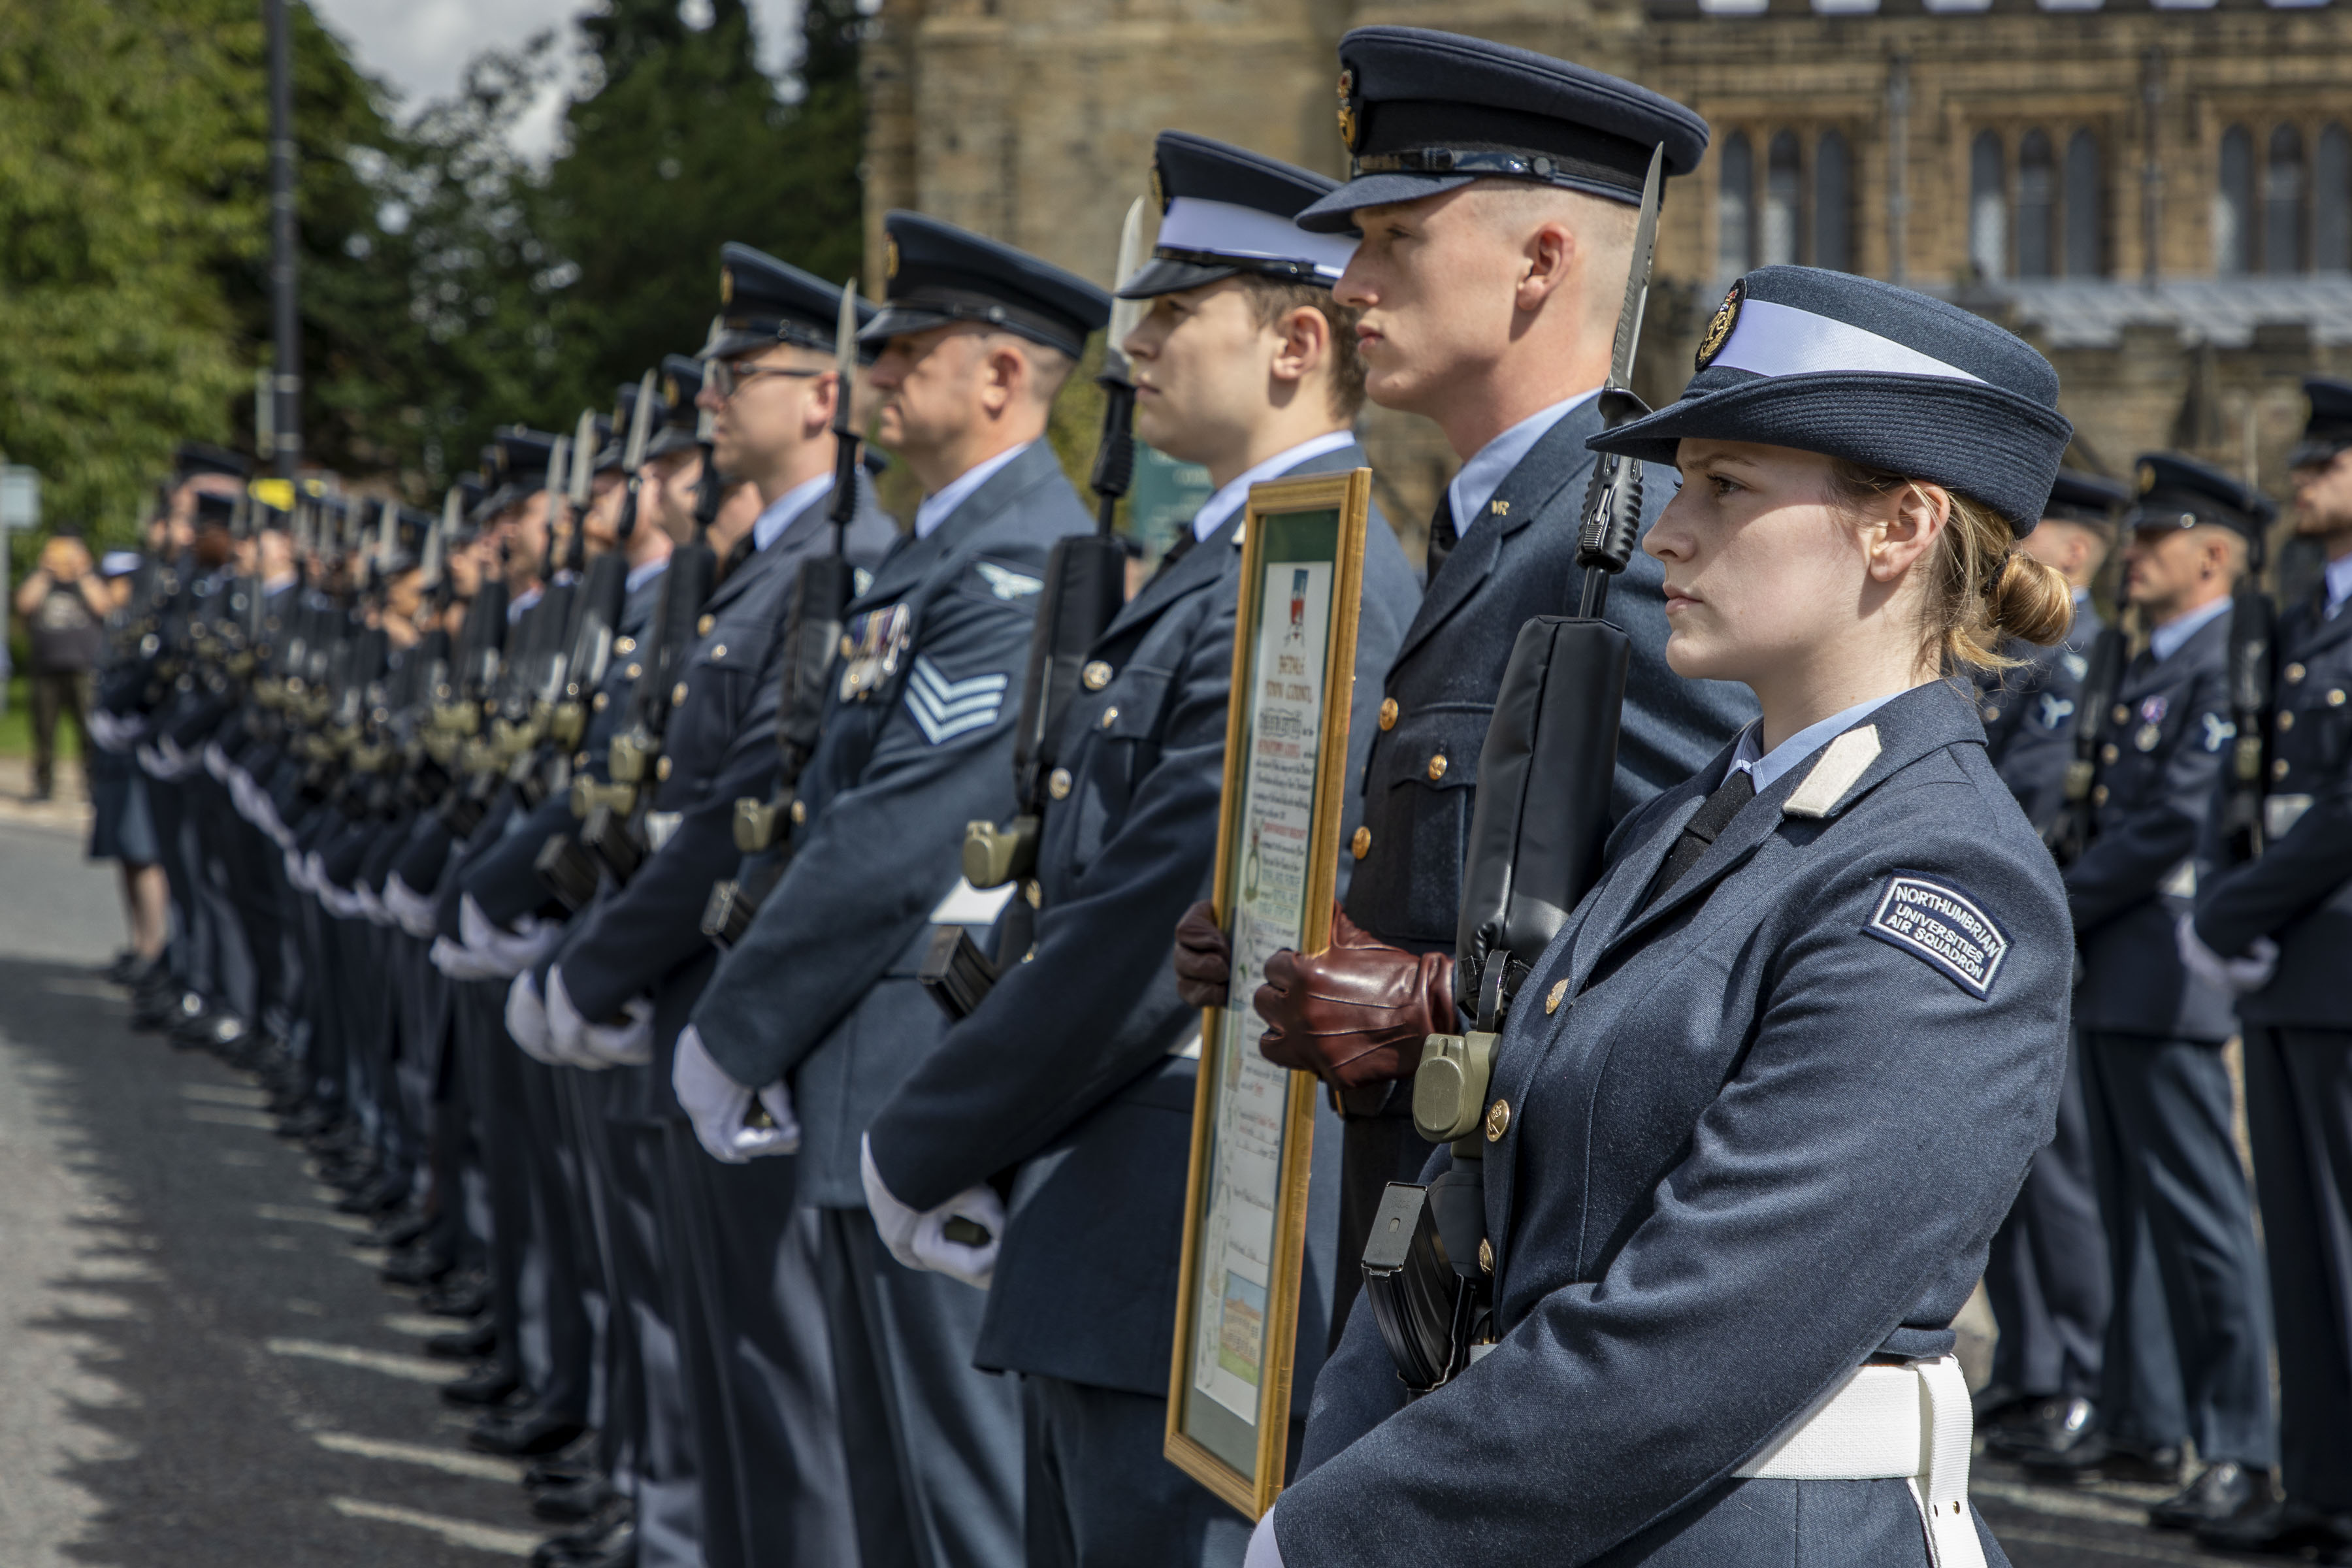 Image shows RAF aviators in parade with Firmin sword certificate.